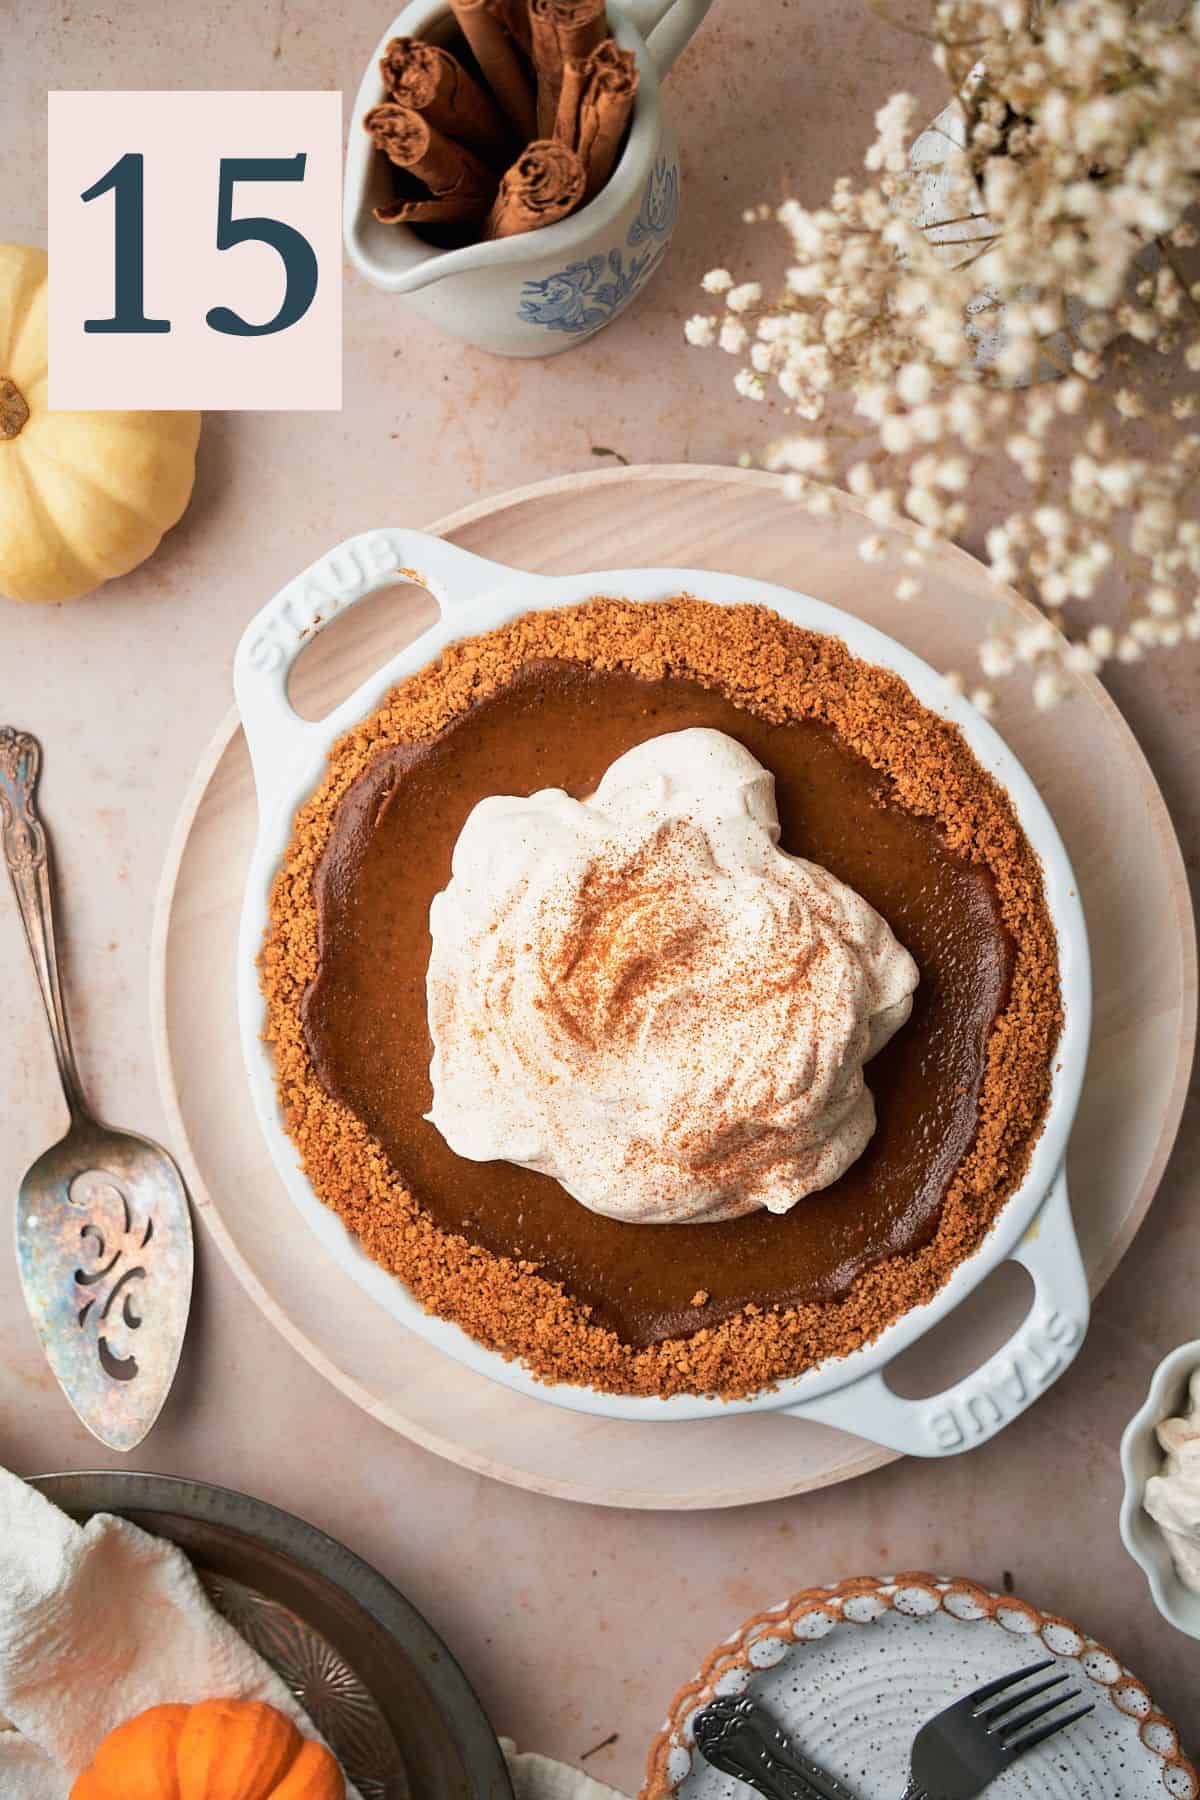 pumpkin pie topped with cinnamon maple whipped cream, and surrounded by flowers, pumpkins, and plates. 